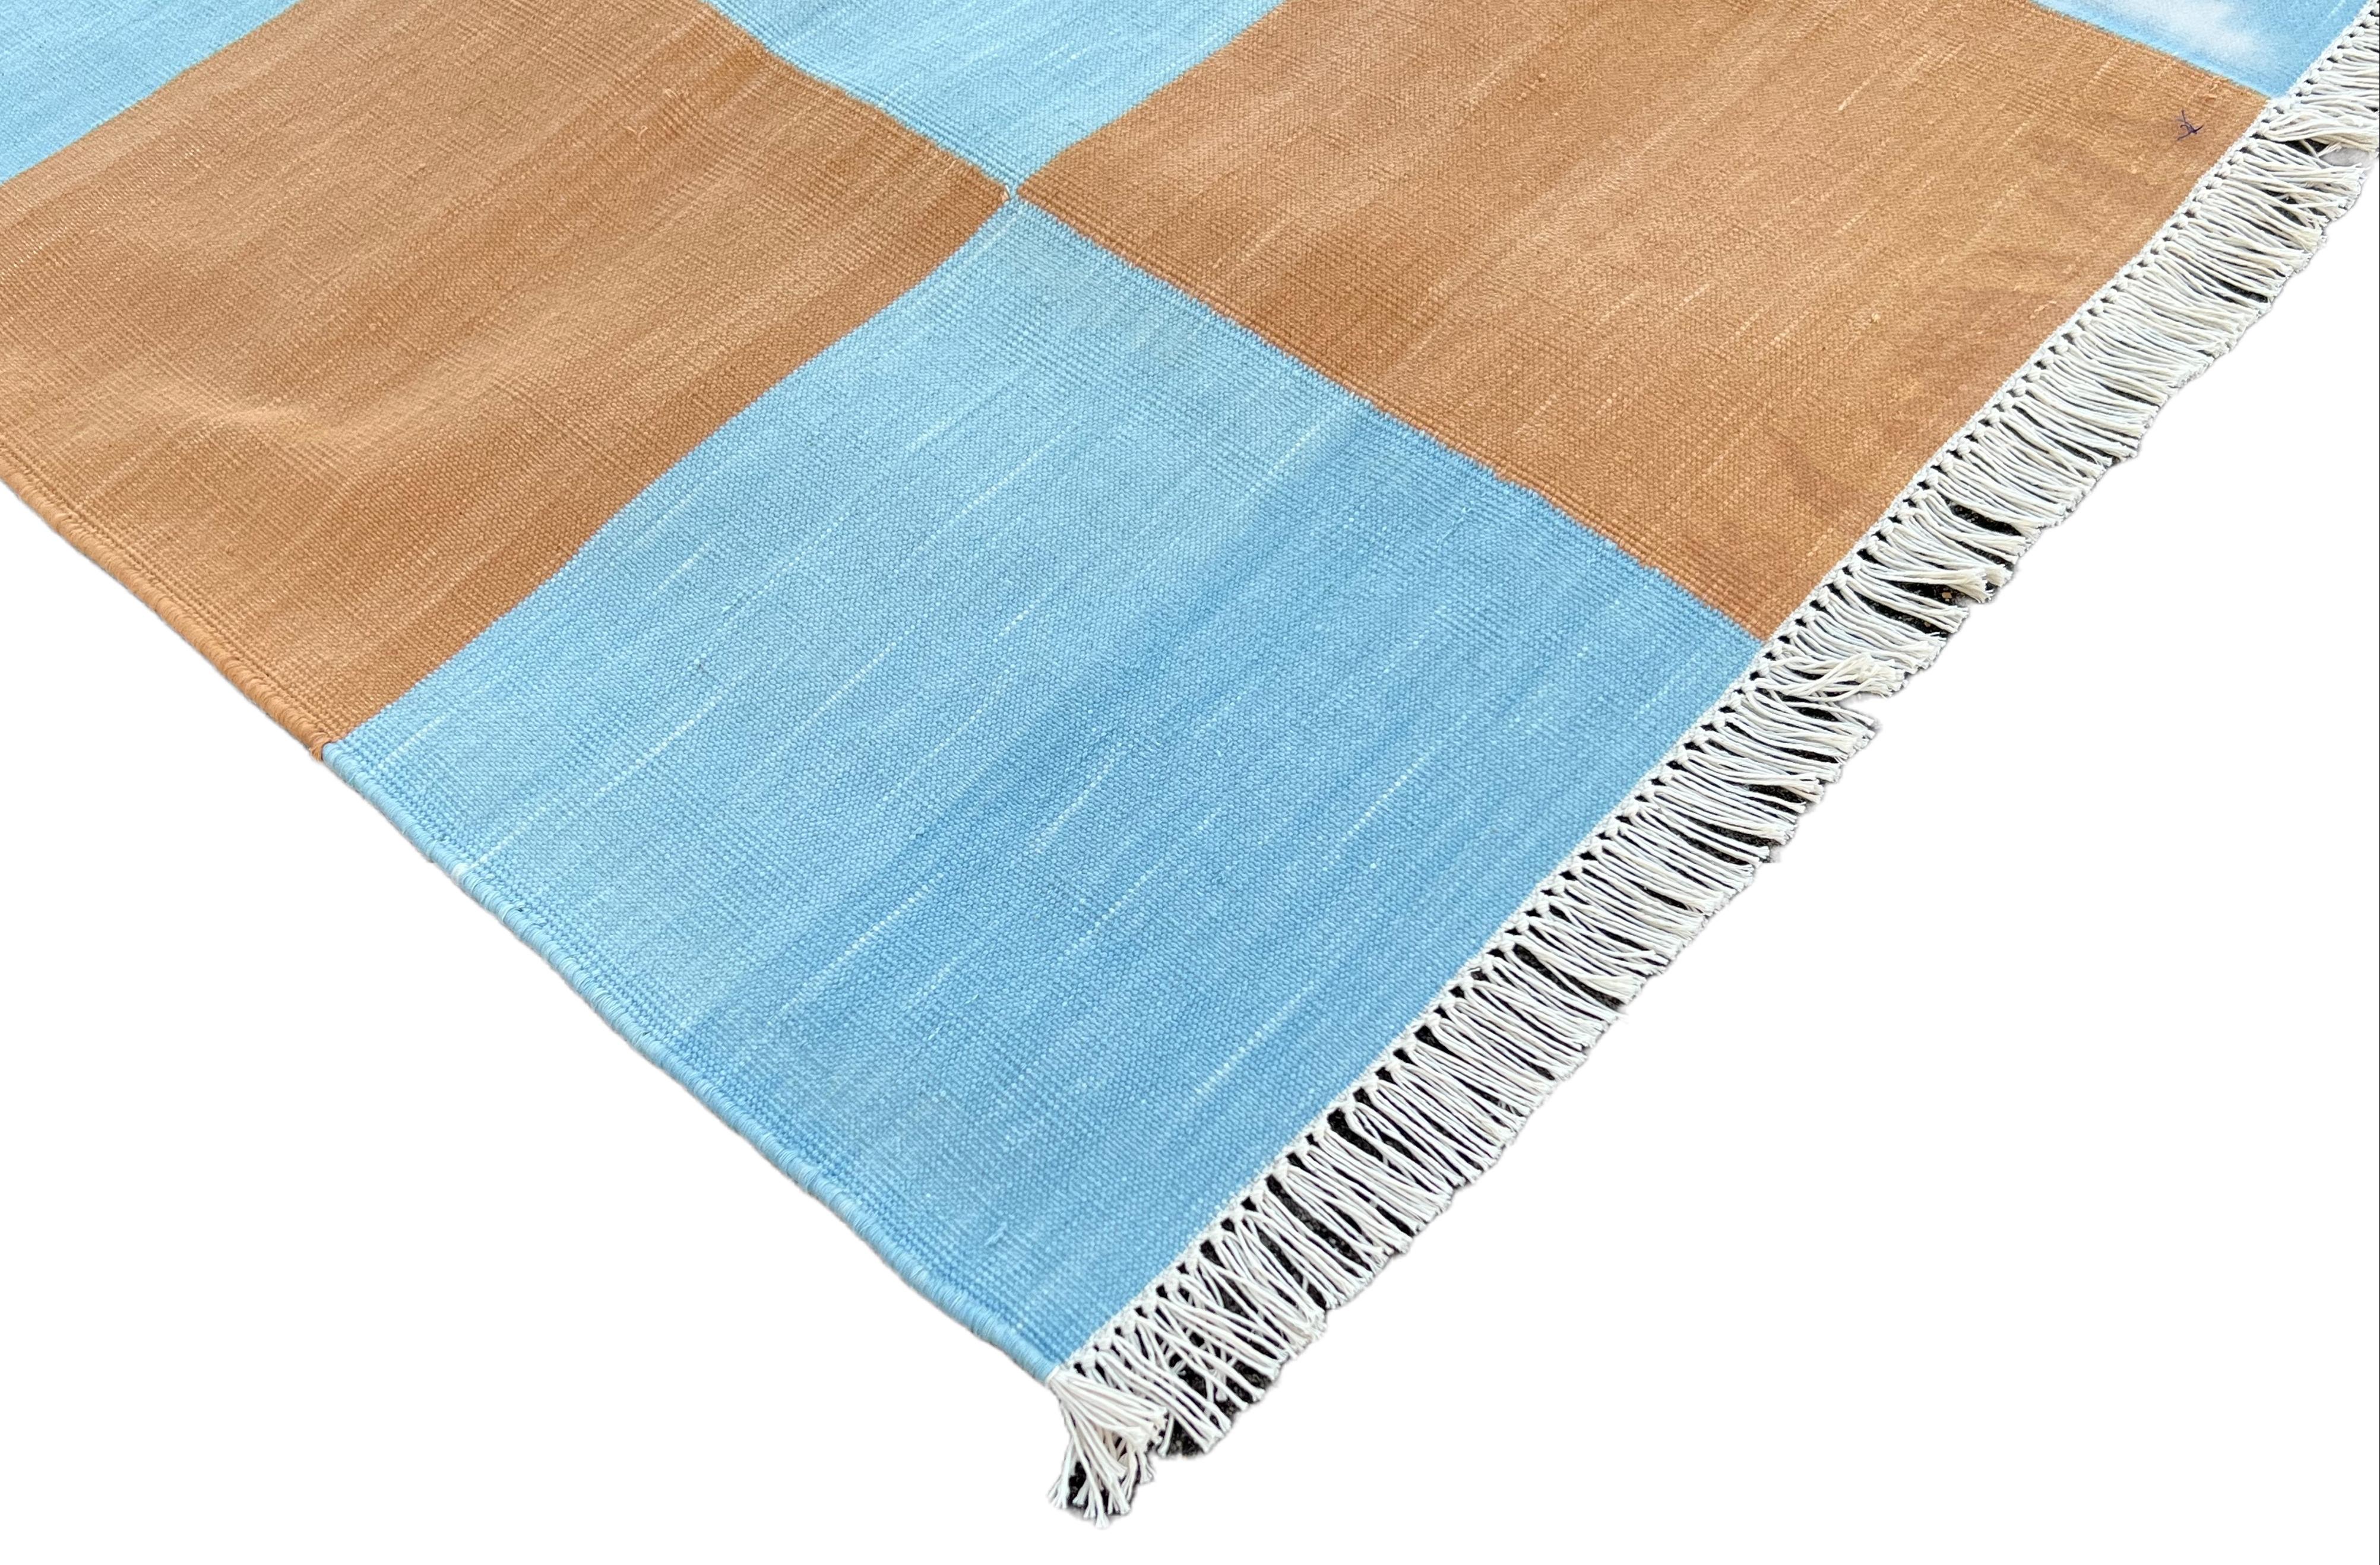 Mid-Century Modern Handmade Cotton Area Flat Weave Rug, 4x6 Blue And Tan Checked Indian Dhurrie Rug For Sale